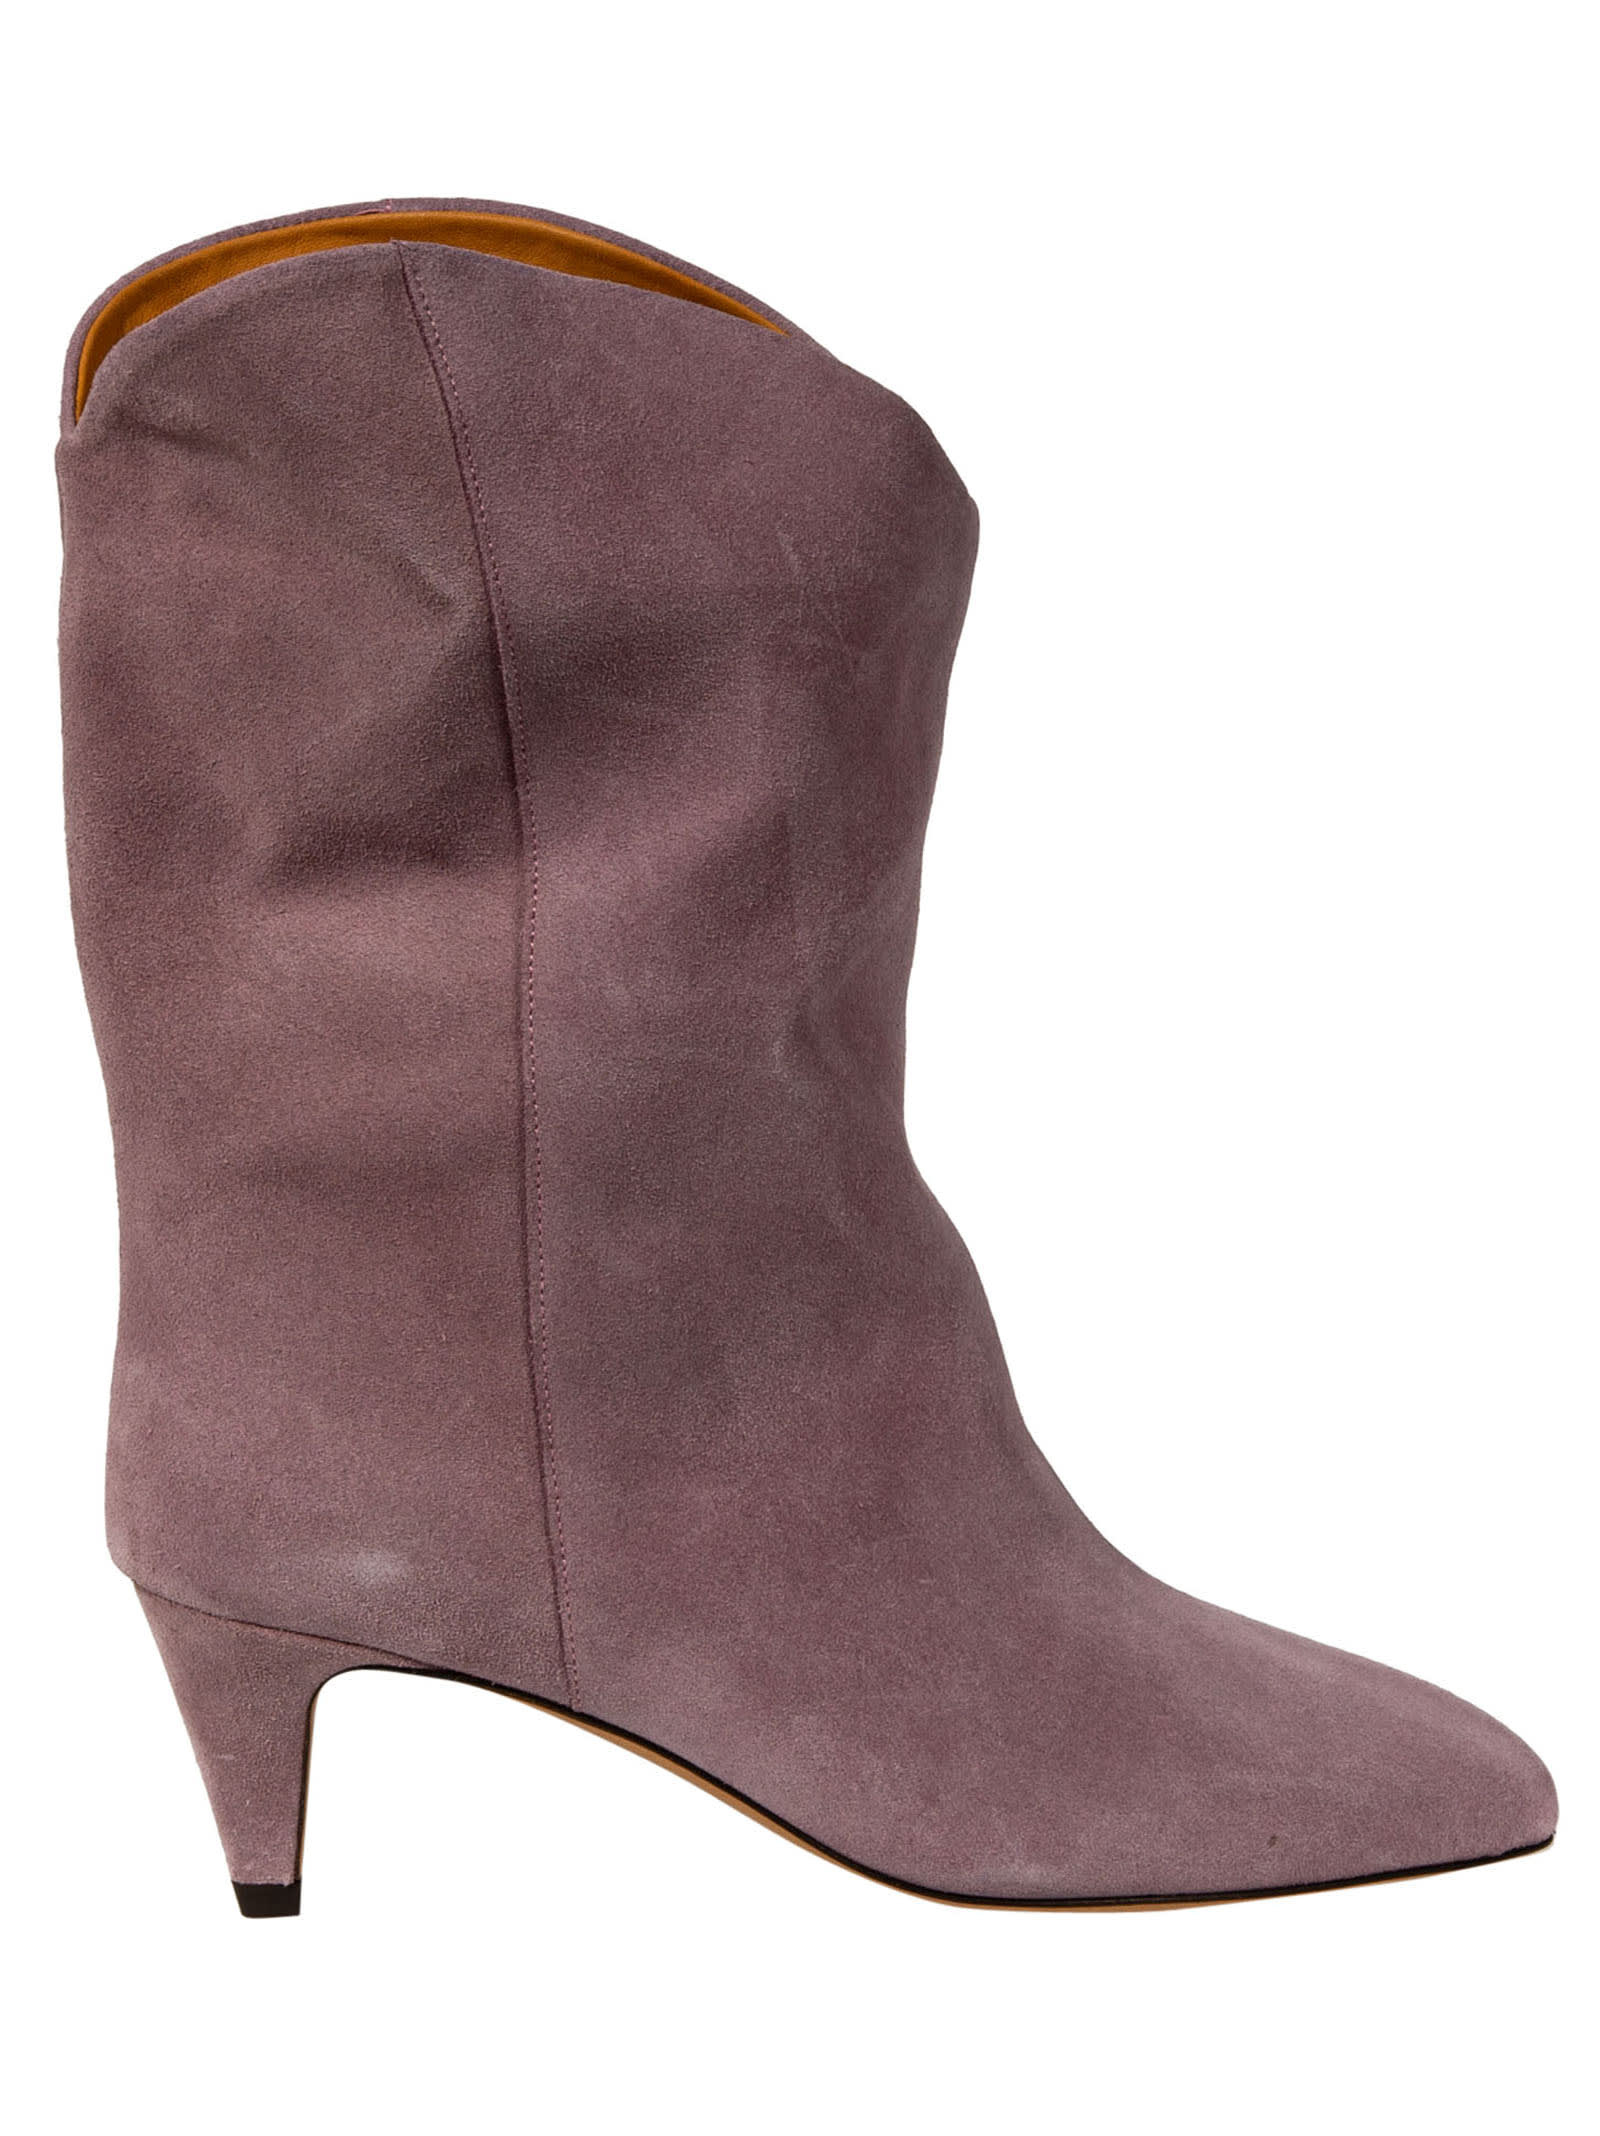 Buy Isabel Marant Seasonal Easy Boots online, shop Isabel Marant shoes with free shipping